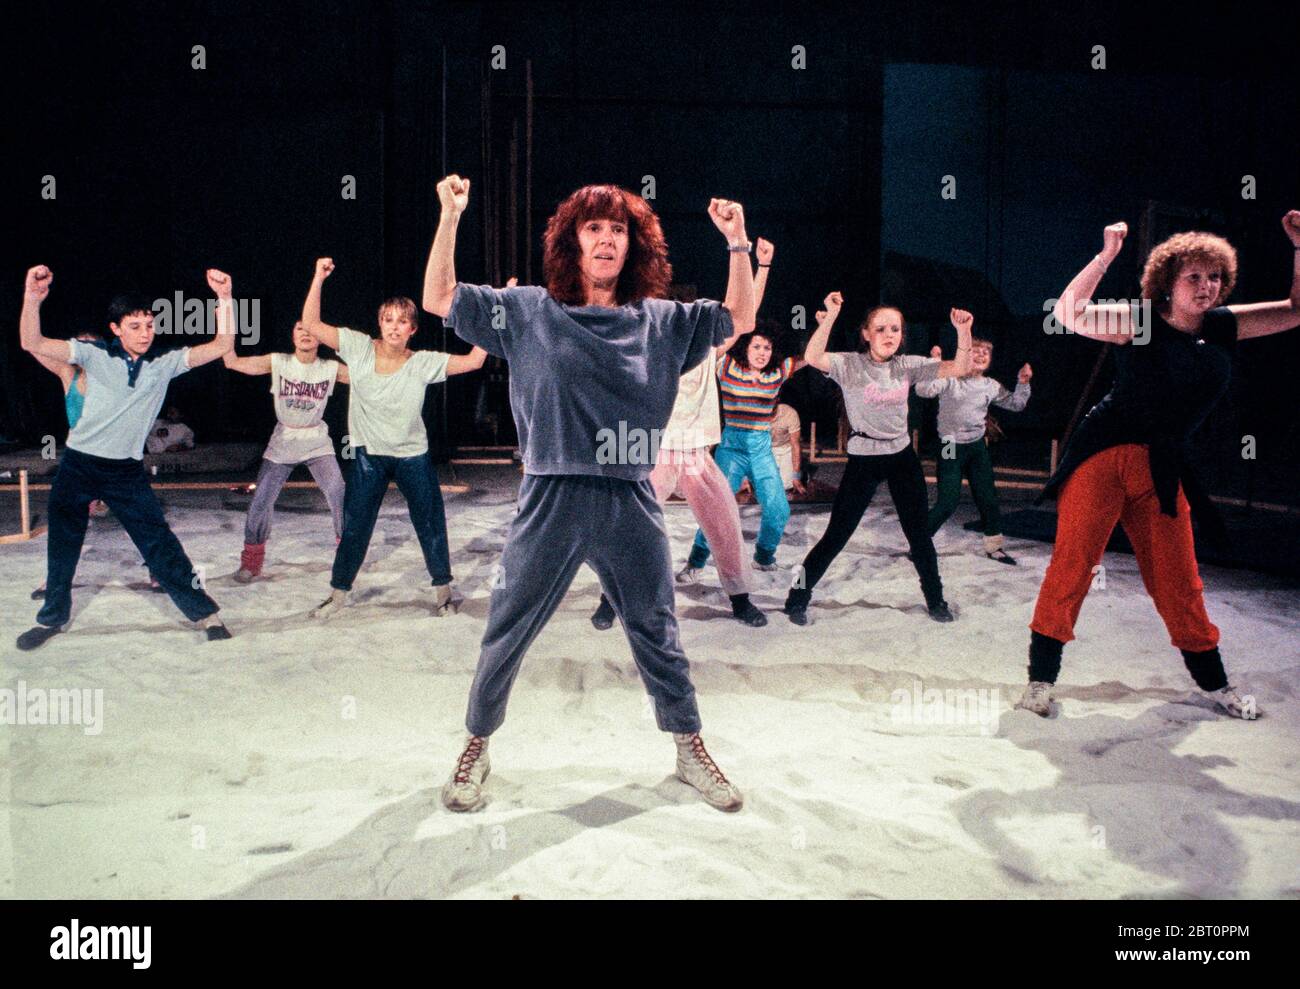 Arlene Phillips choreographer director of Hot Gossip rehearsing a childrens dance troupe for the film Legend 1984 Stock Photo